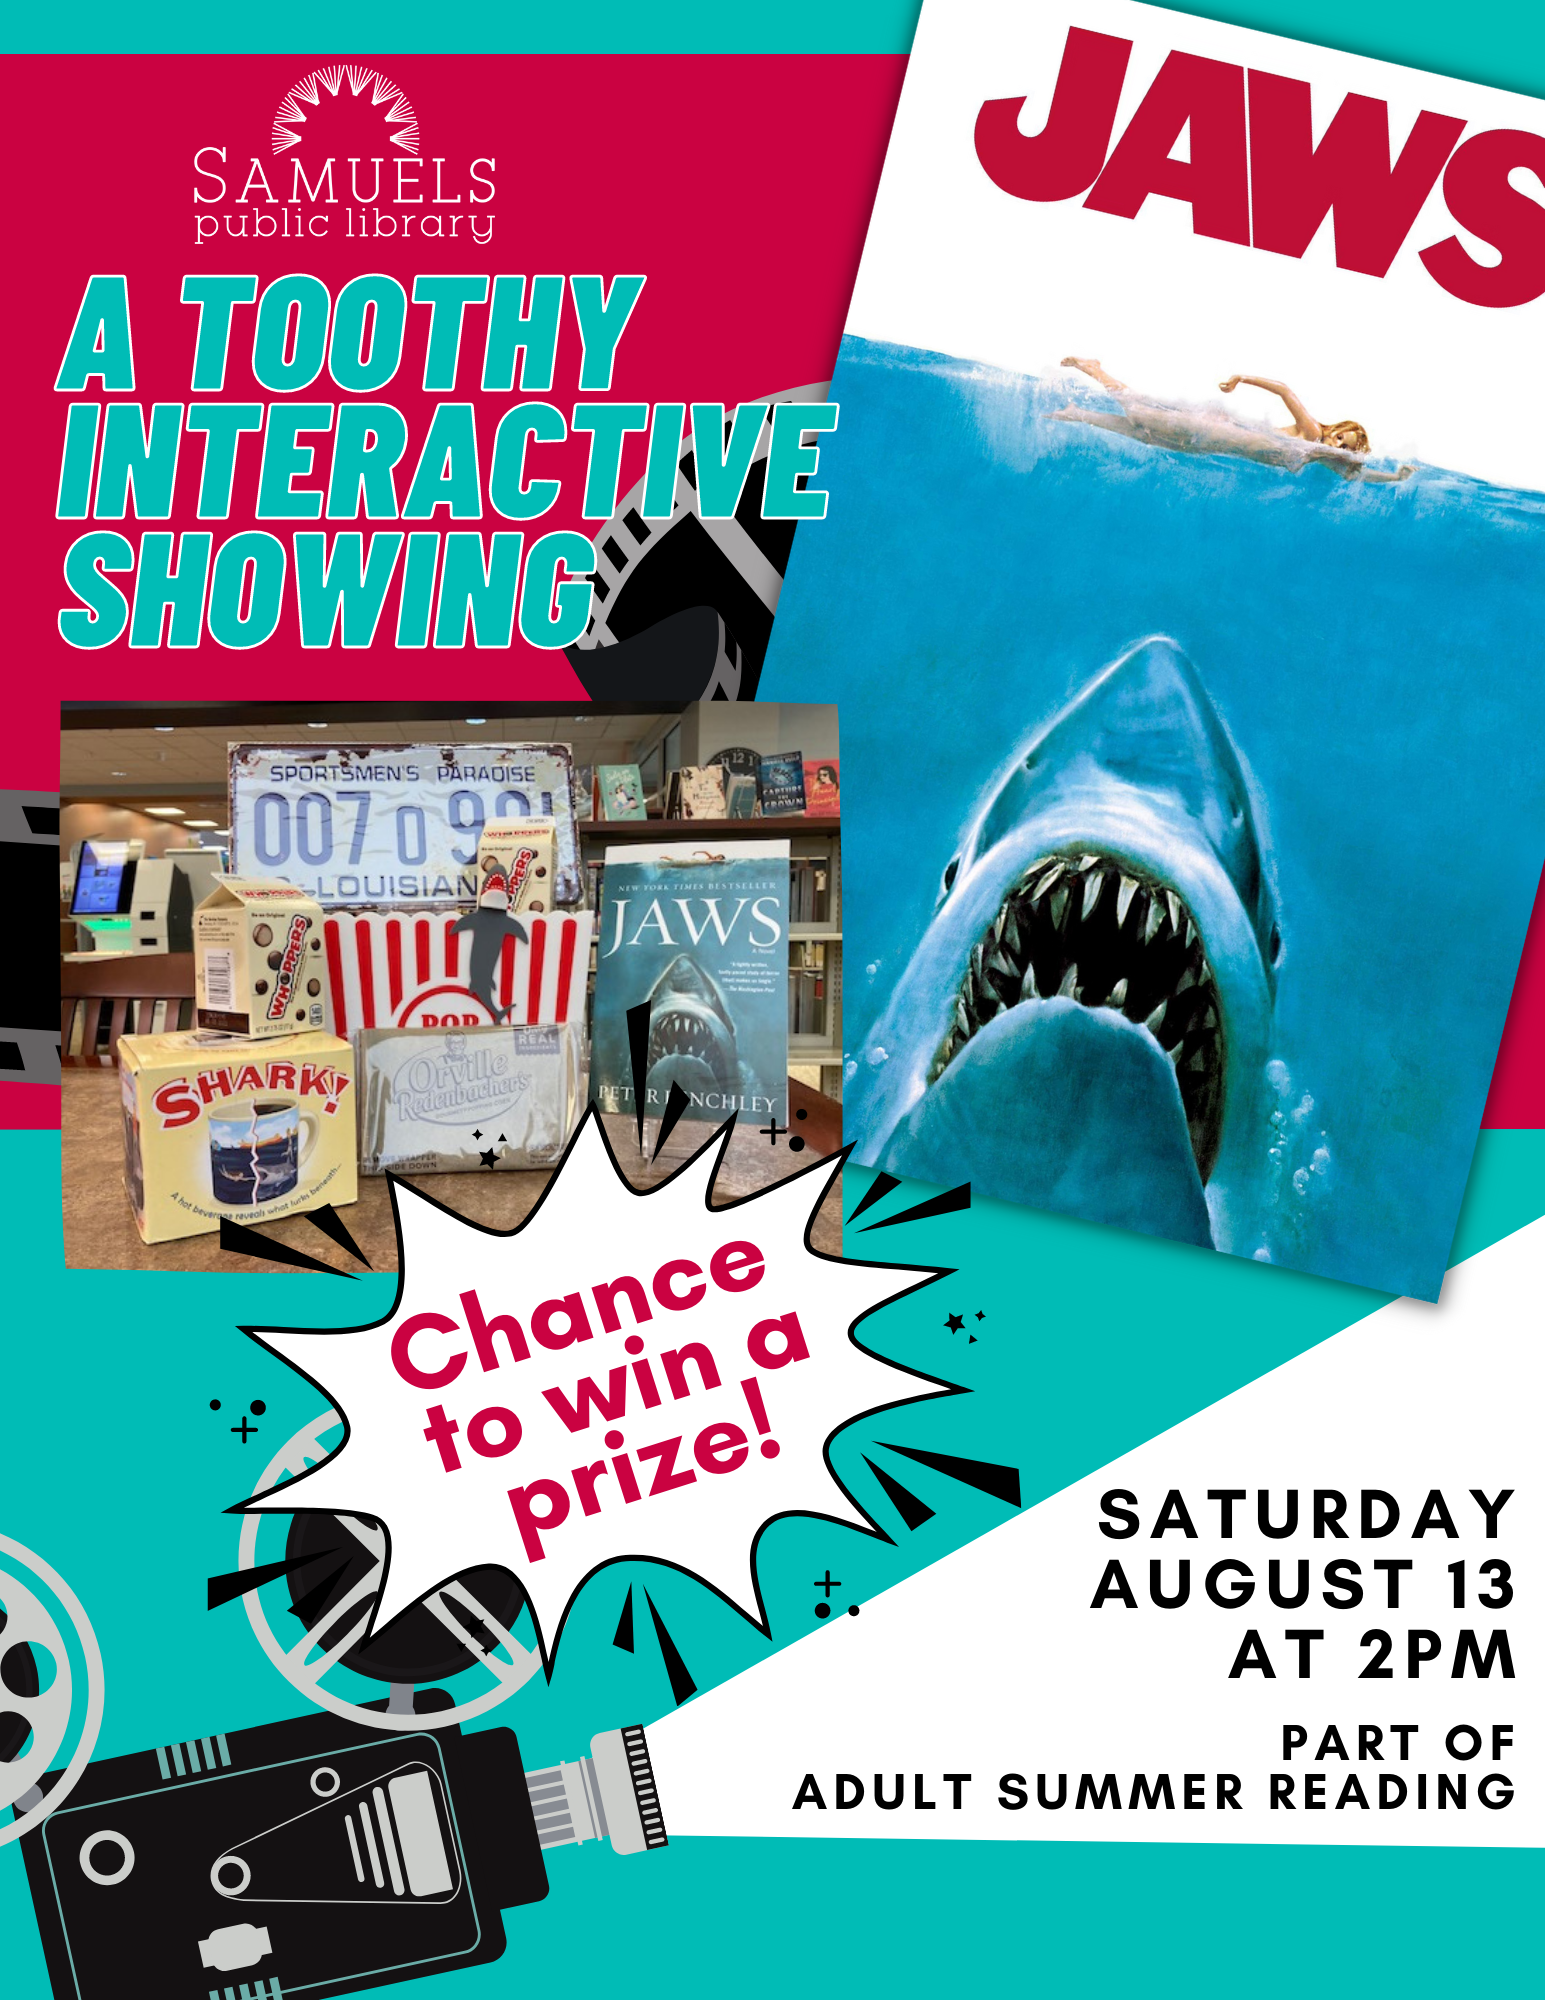 program flyer showing movie poster with shark and prize basket